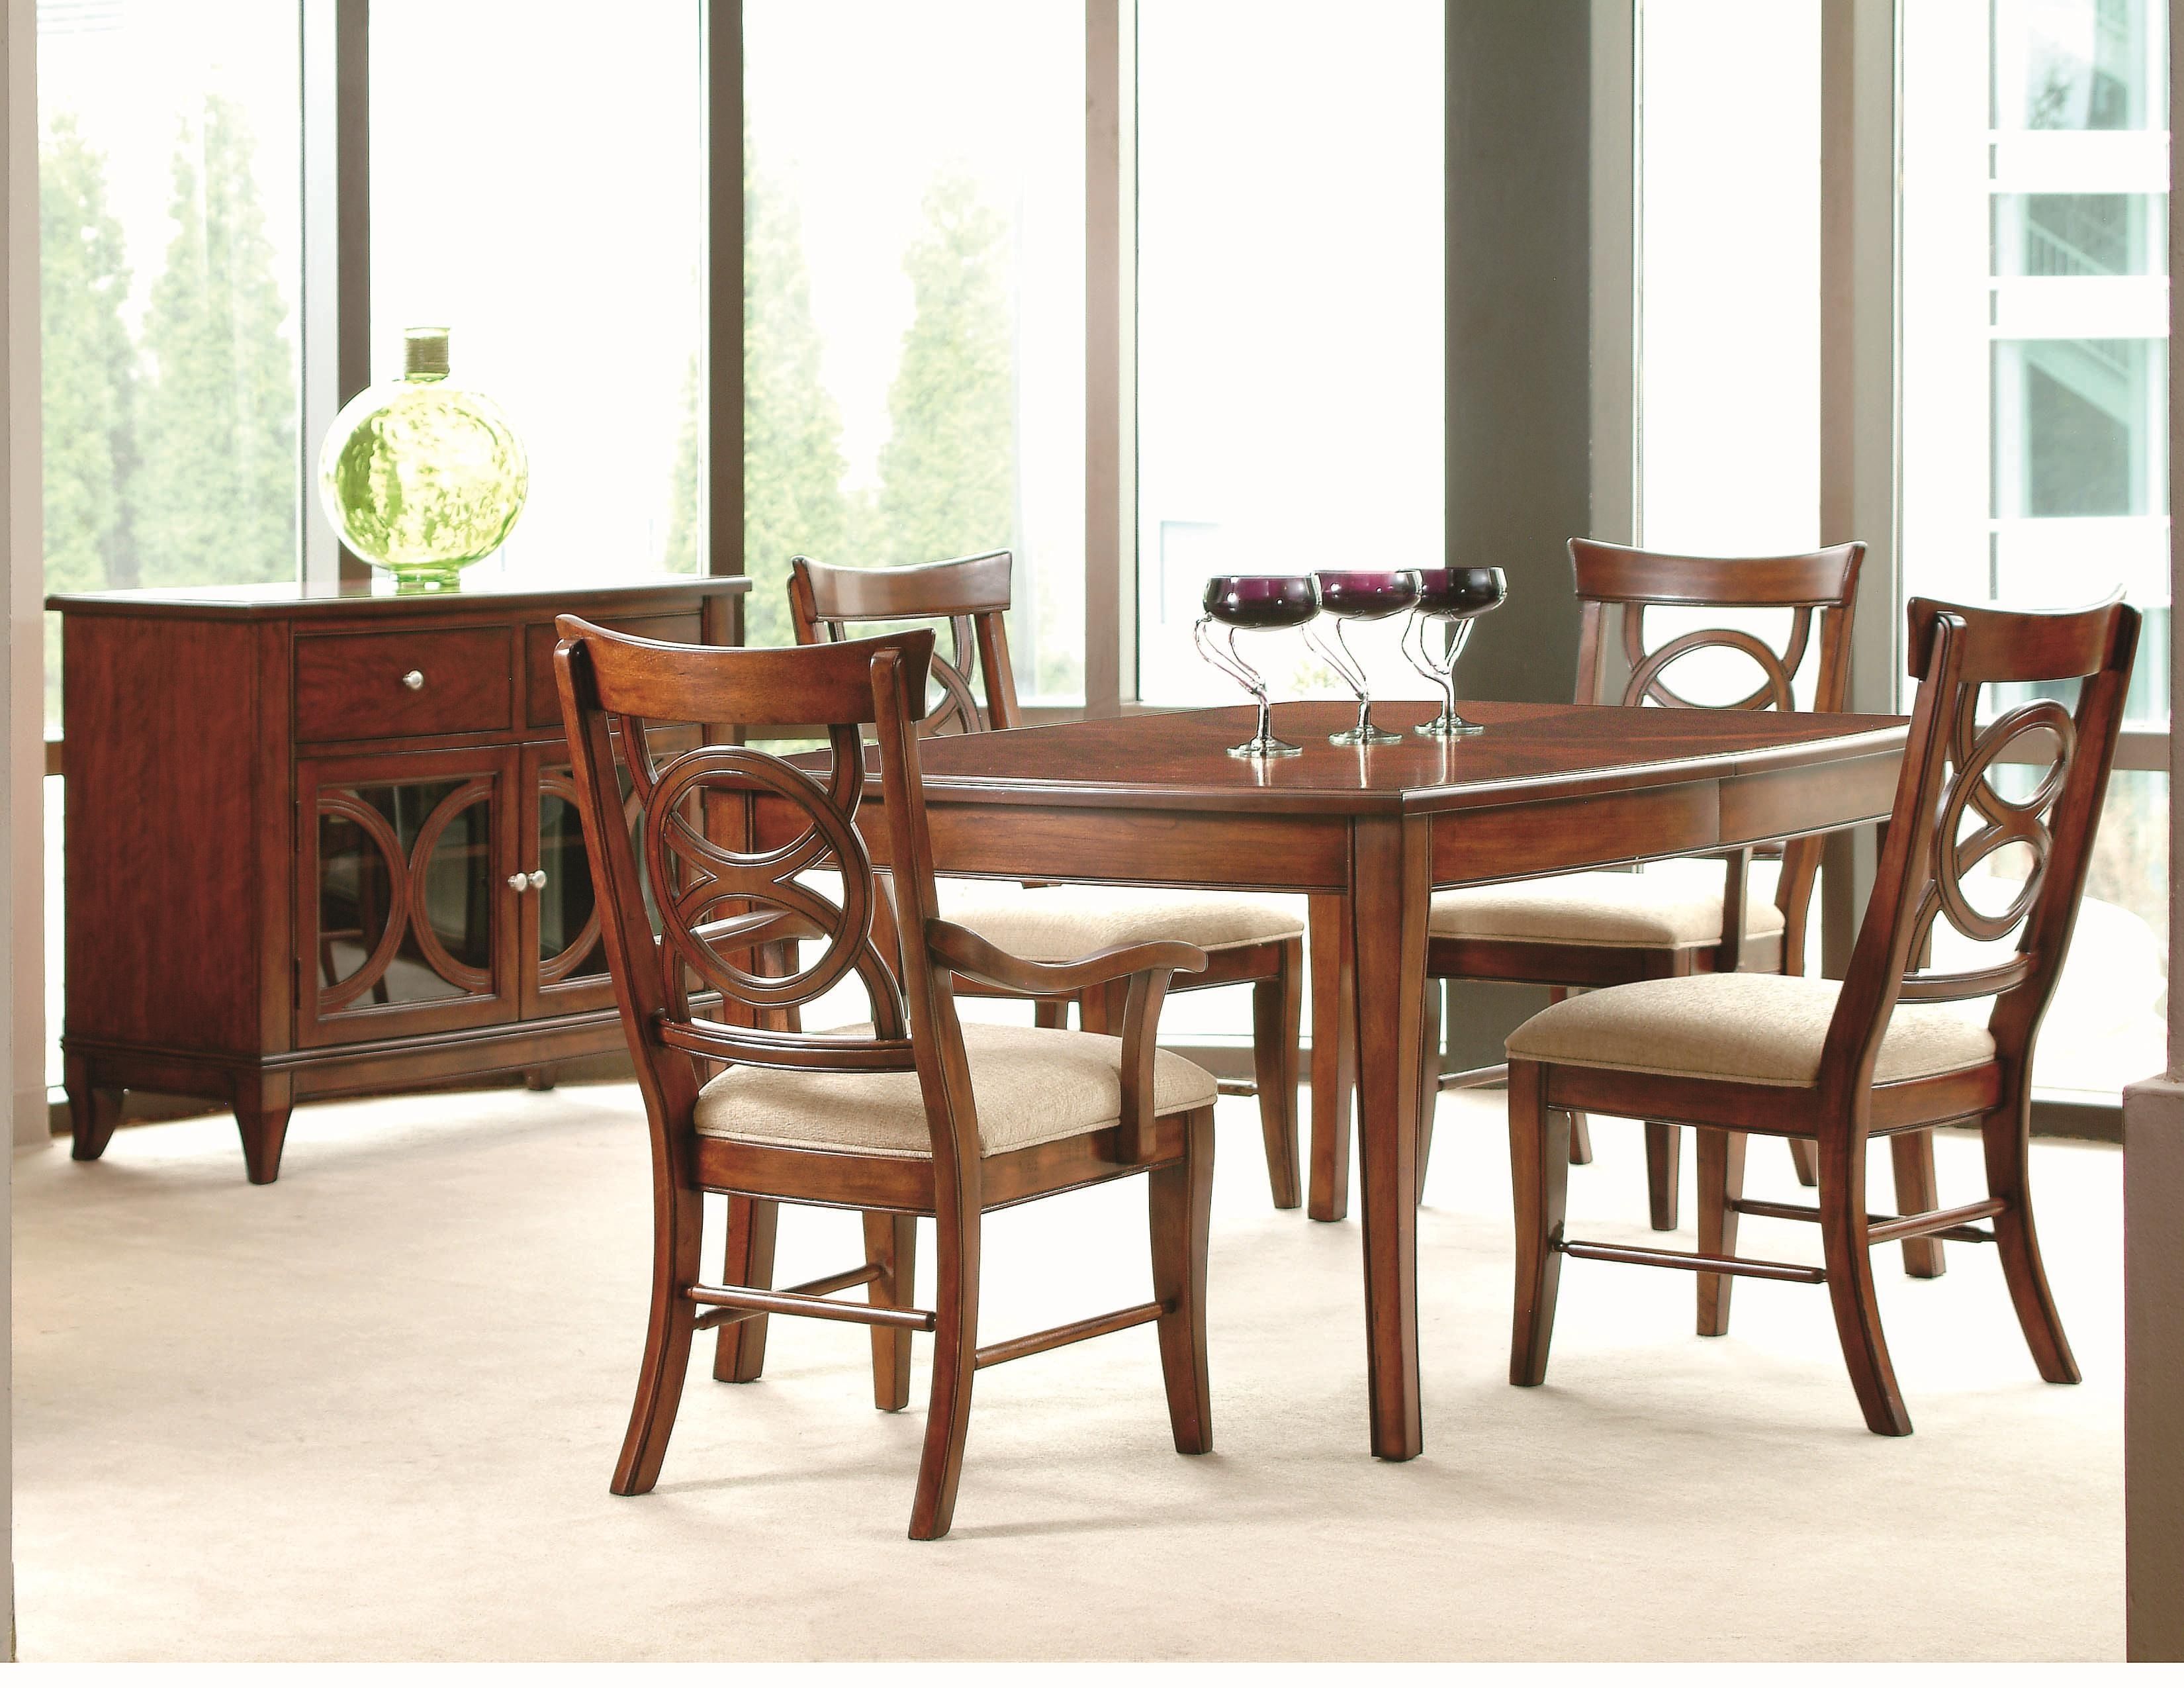 Lacquer Craft Usa Orion Dining Side Chair With Wood Veneers In Famous Orion Side Chairs (View 18 of 20)